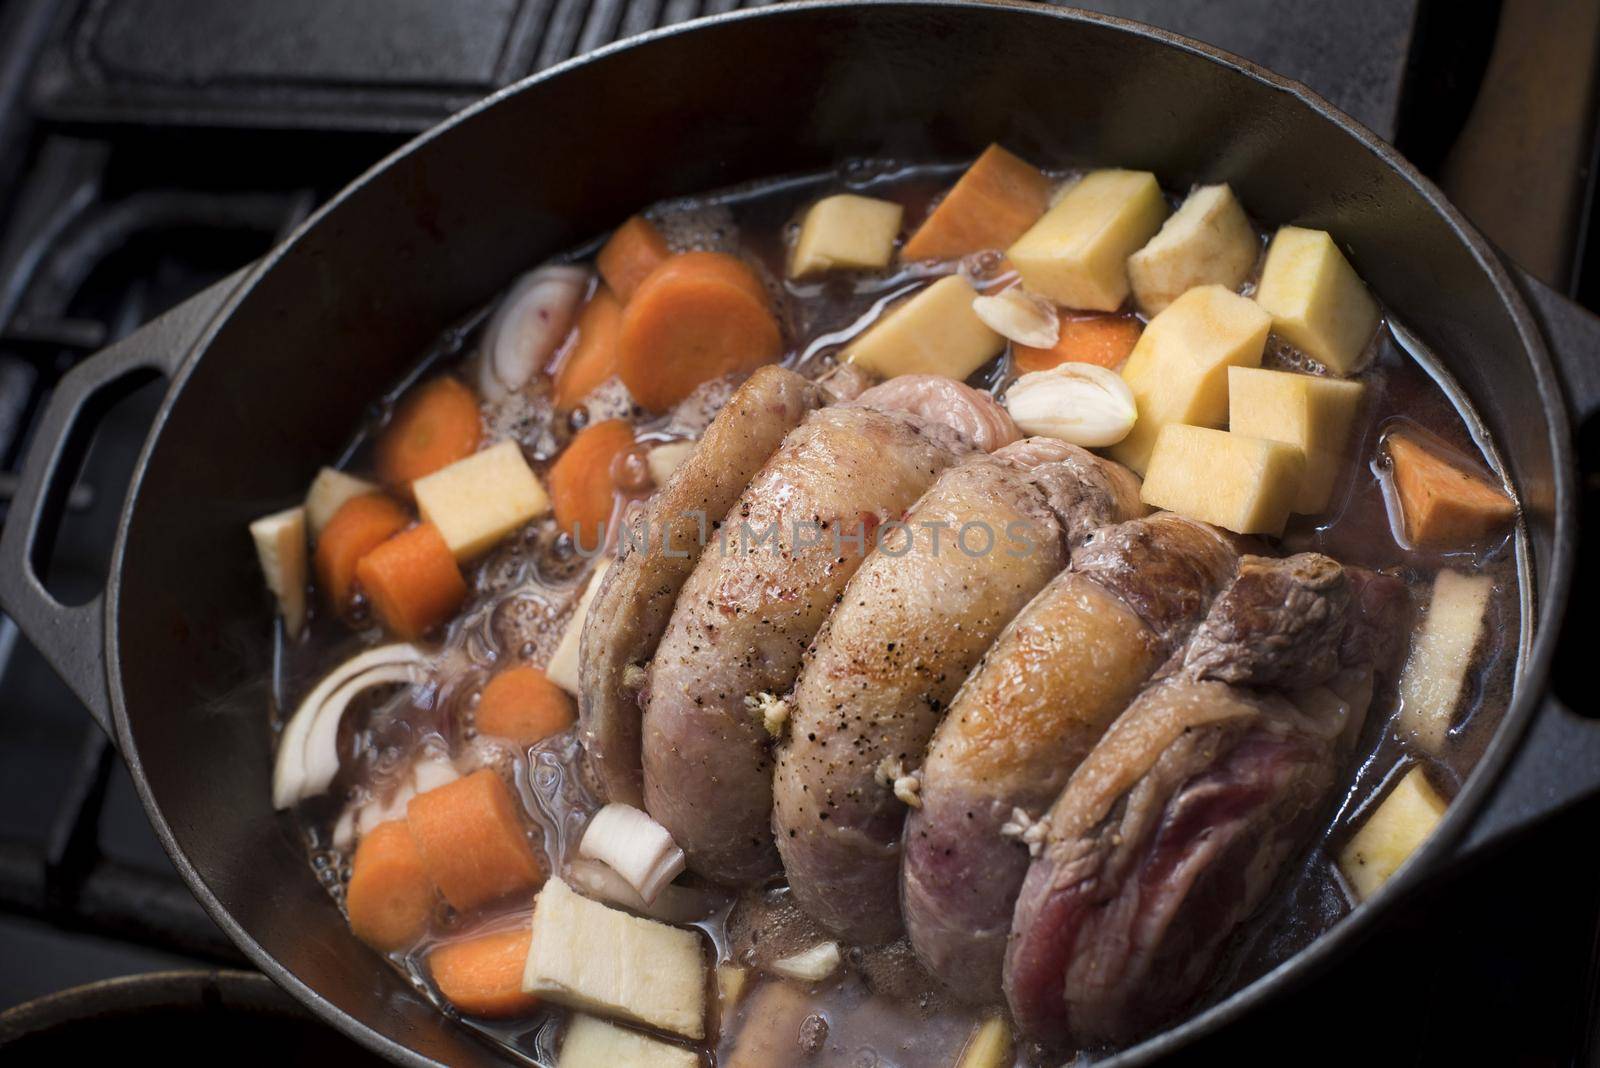 A close up of a trussed, beef shoulder simmering in a pot with assorted vegetables.